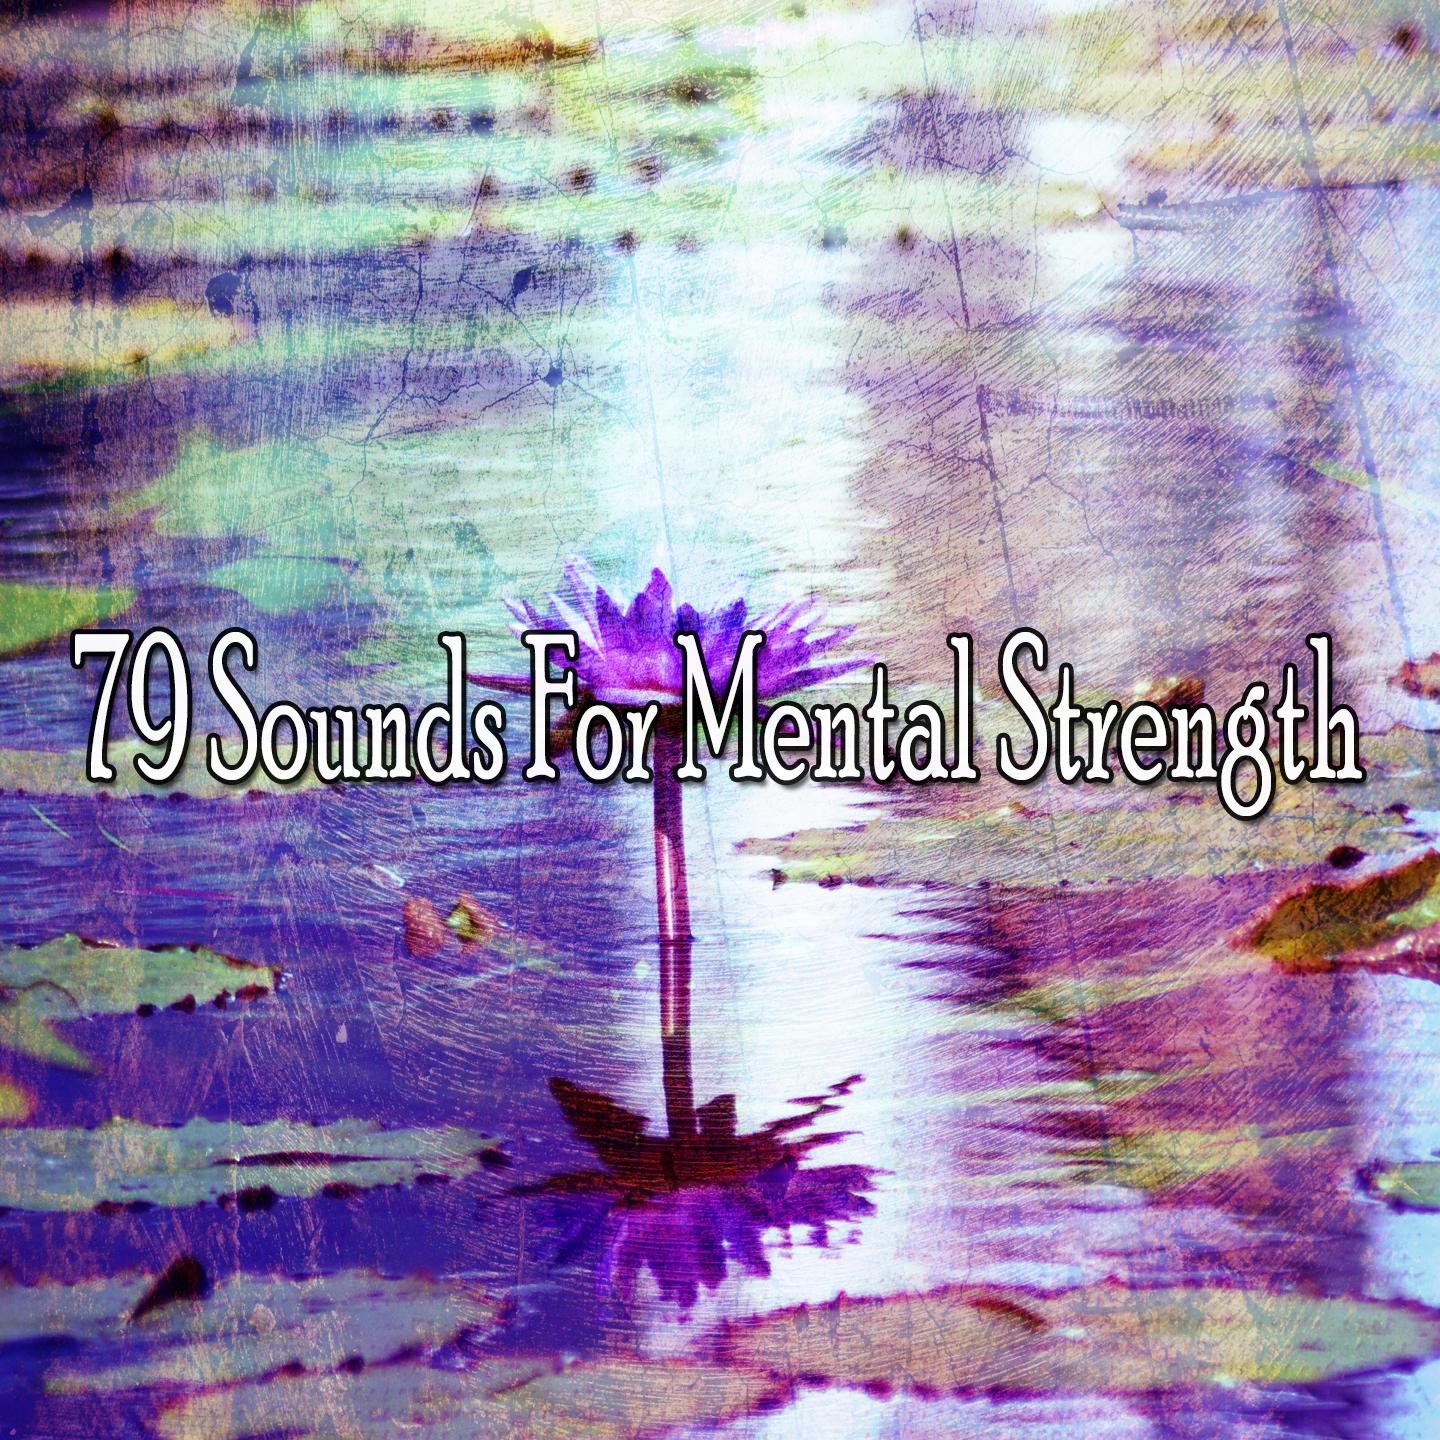 79 Sounds for Mental Strength